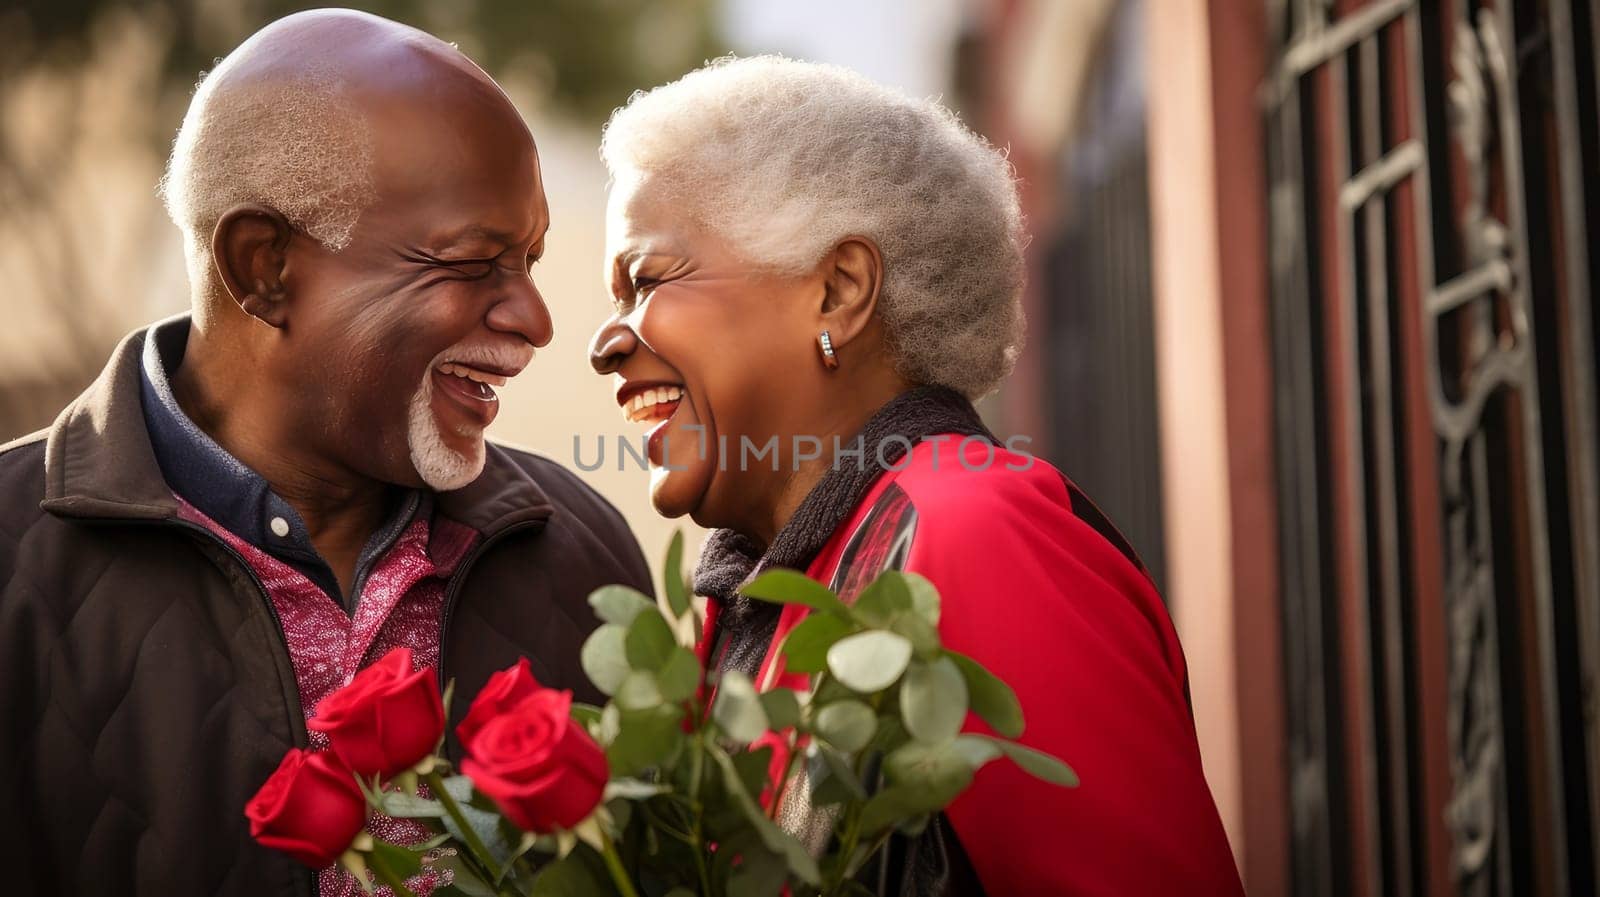 An elderly African man gives his wife a large bouquet of roses for Valentine's Day by Alla_Yurtayeva